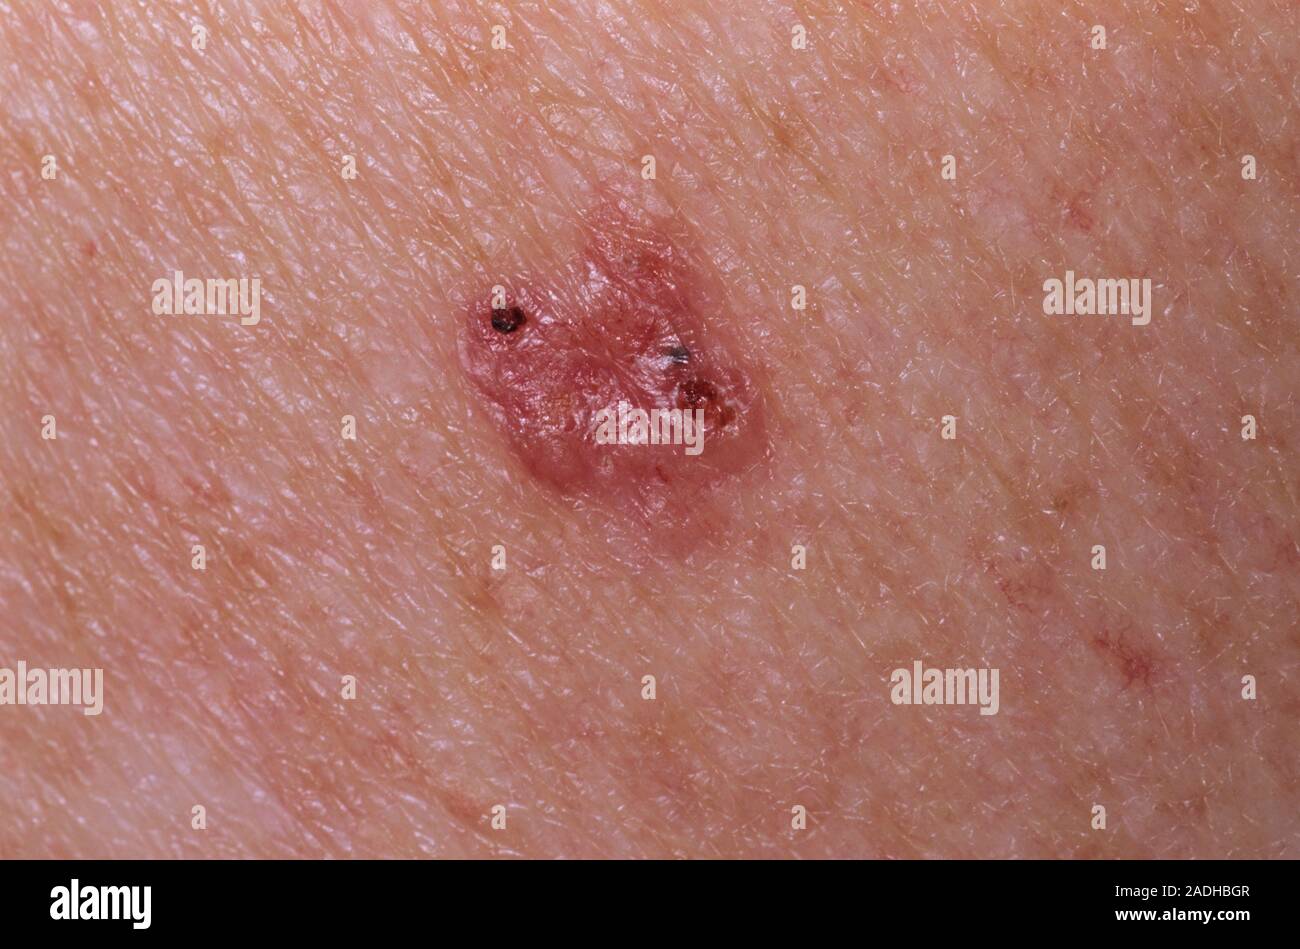 Skin Cancer Basal Cell Carcinoma Bcc Or Rodent Ulcer On The Skin